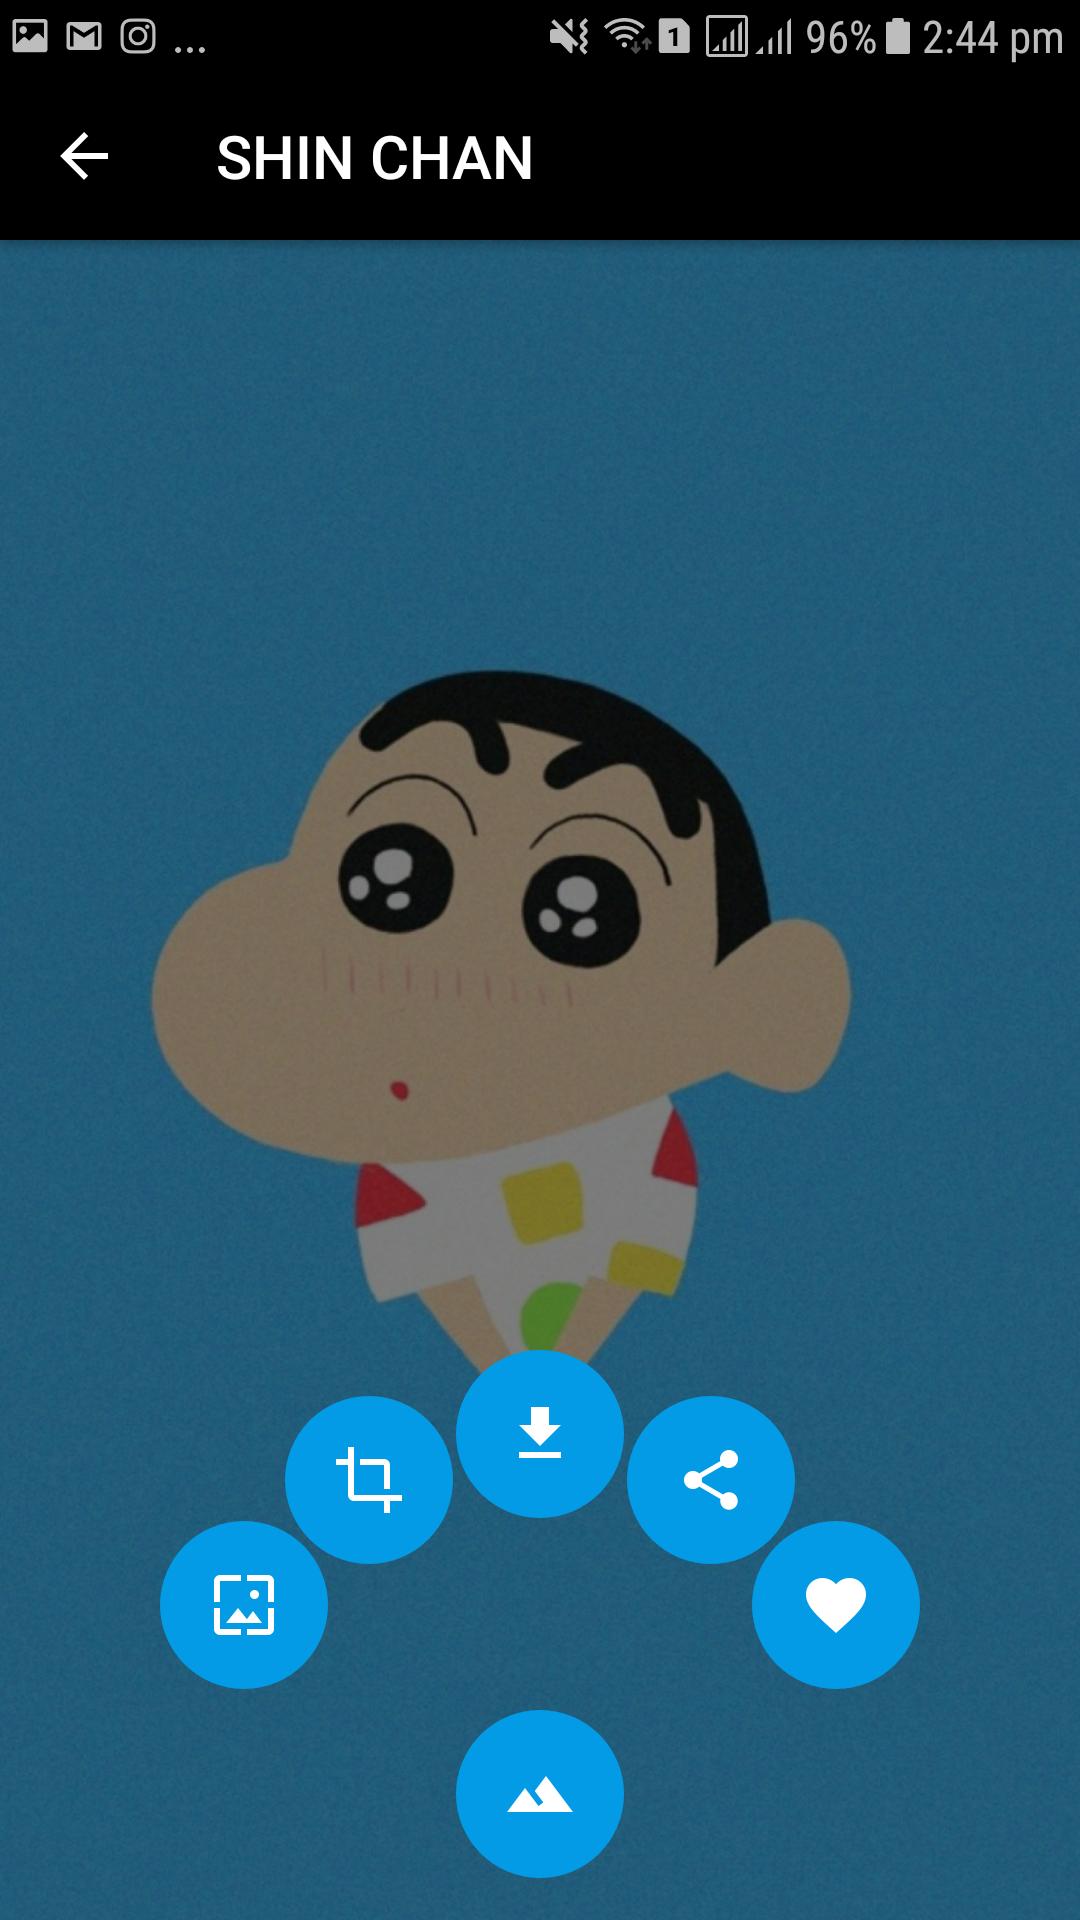 Shin Chan Photos, Wallpapers,HD for Android - APK Download